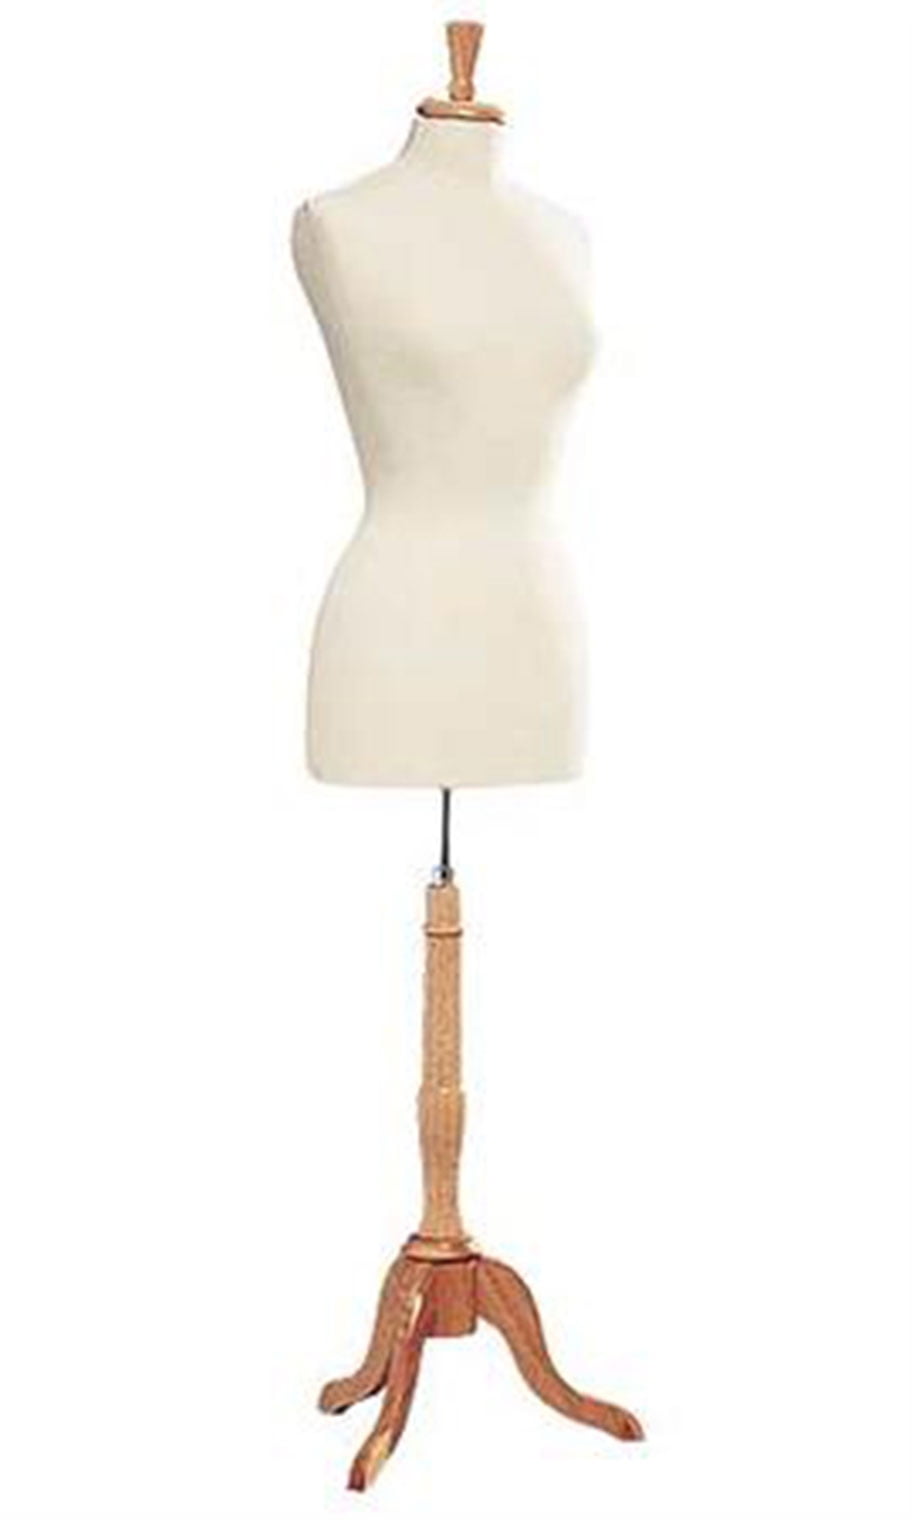 Includes Base Form and Finial Female Off White Jersey Dressmaker Form 